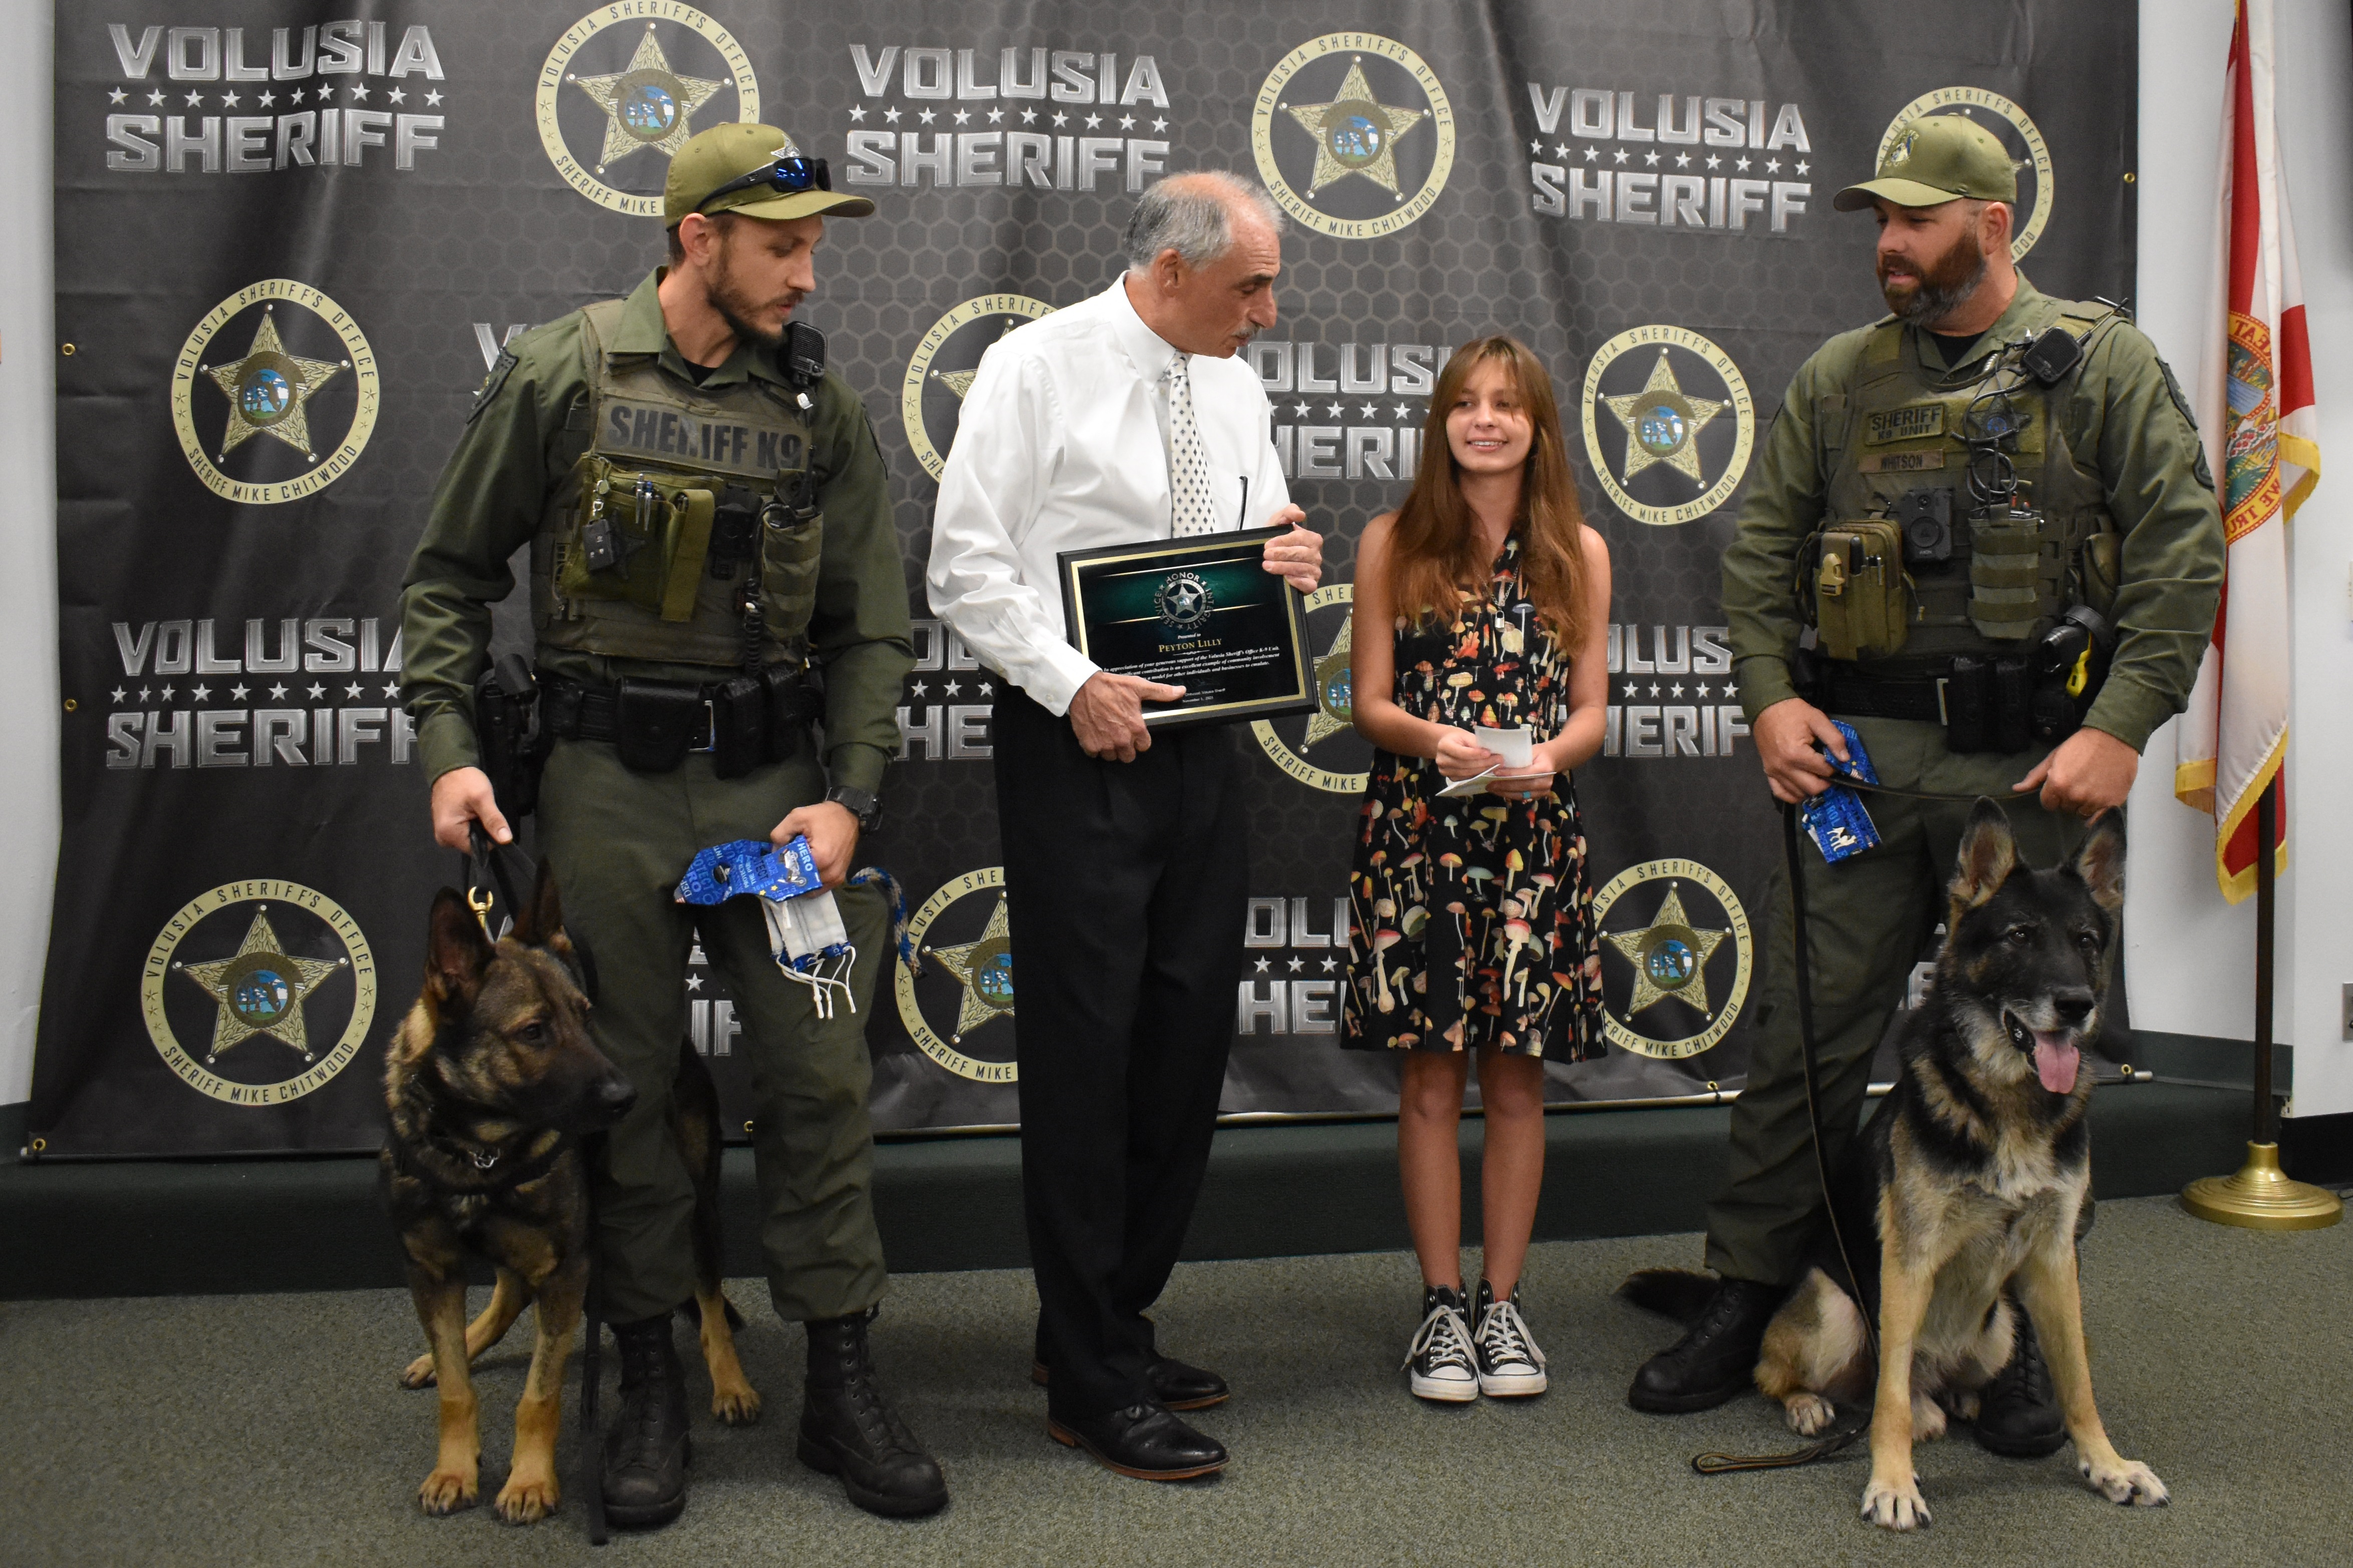 Ormond Beach Girl, 12, Donates $1,000 to Sheriff's Foundation for K-9s Image